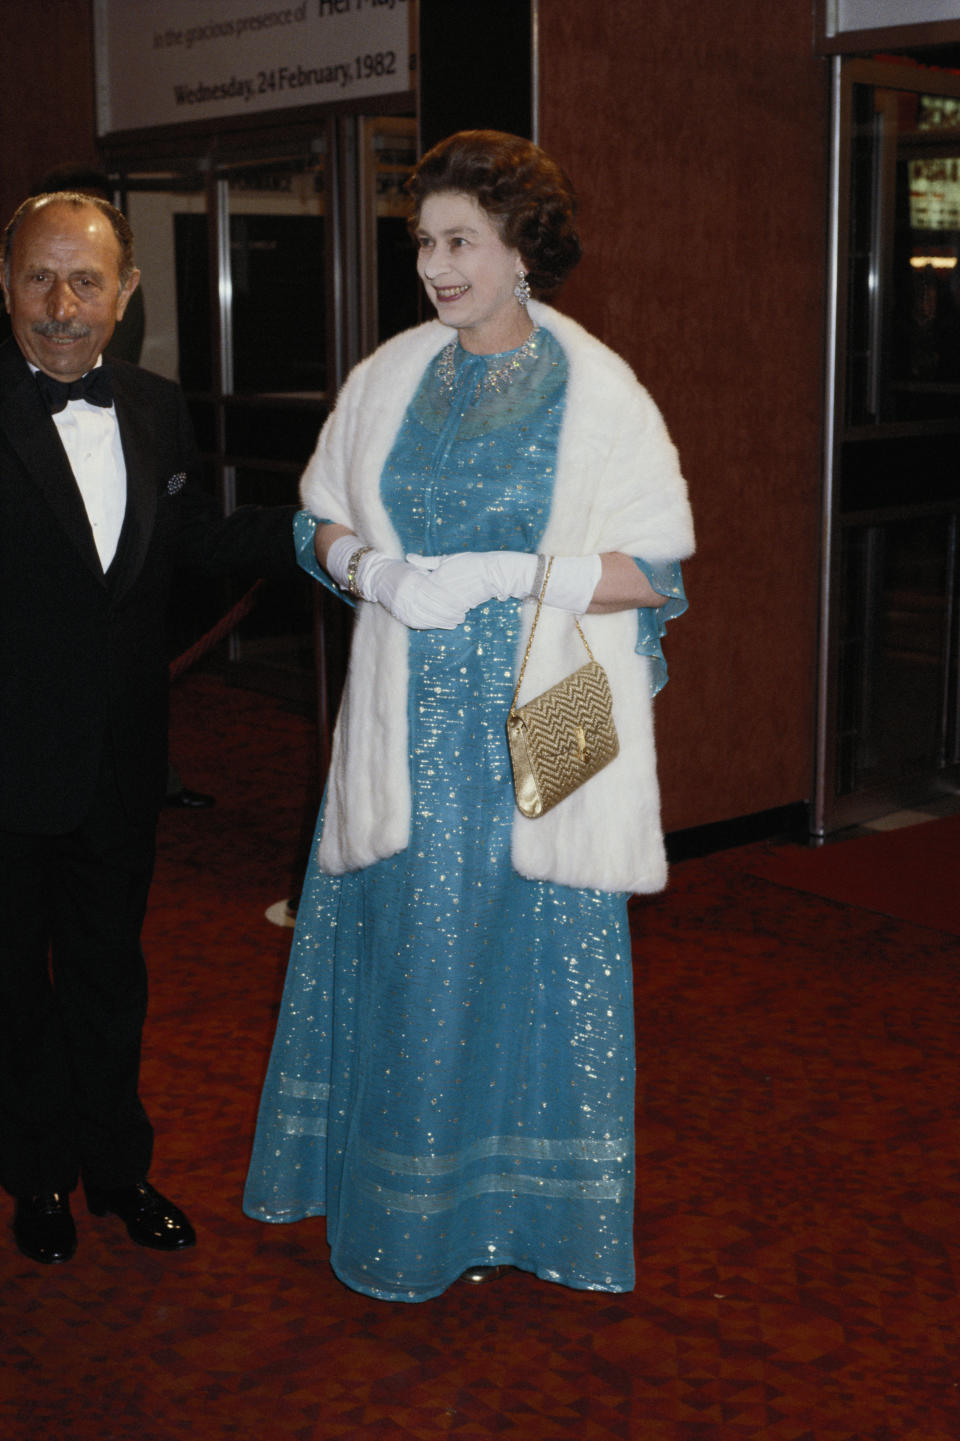 The Queen at a London film premiere in 1982